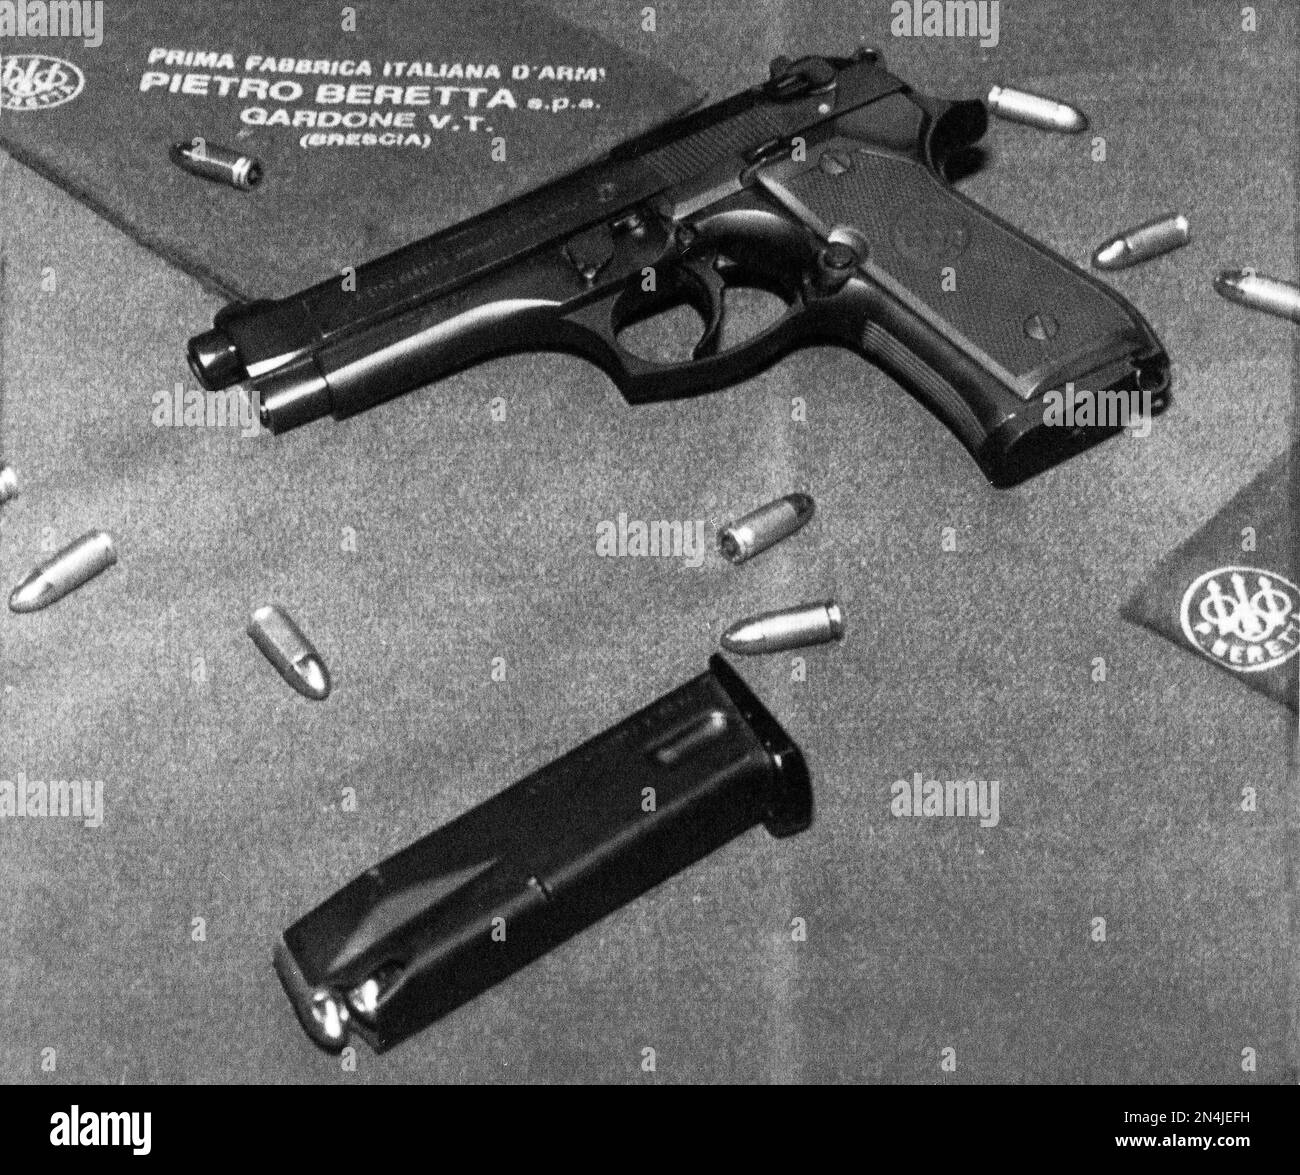 This is a close up of an Italian Beretta pistol 9mm which will replace the  Colt .